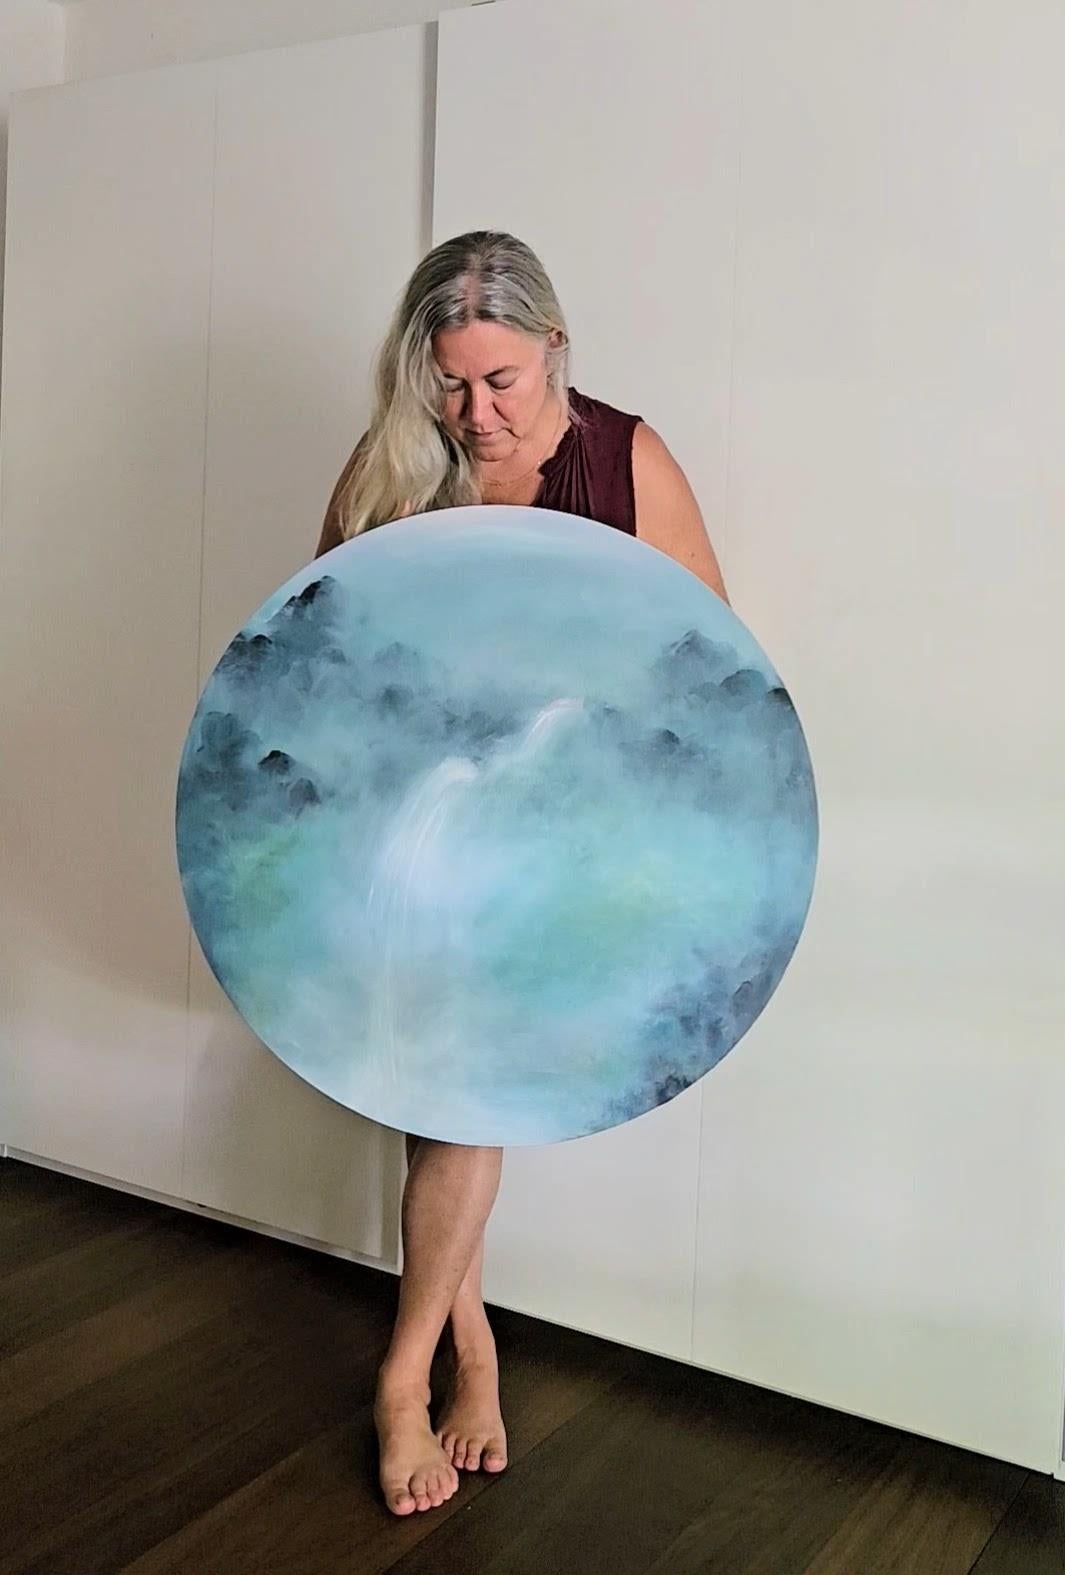 The Lark Ascending - Round canvas abstract landscape painting - Painting by Jennifer L. Baker